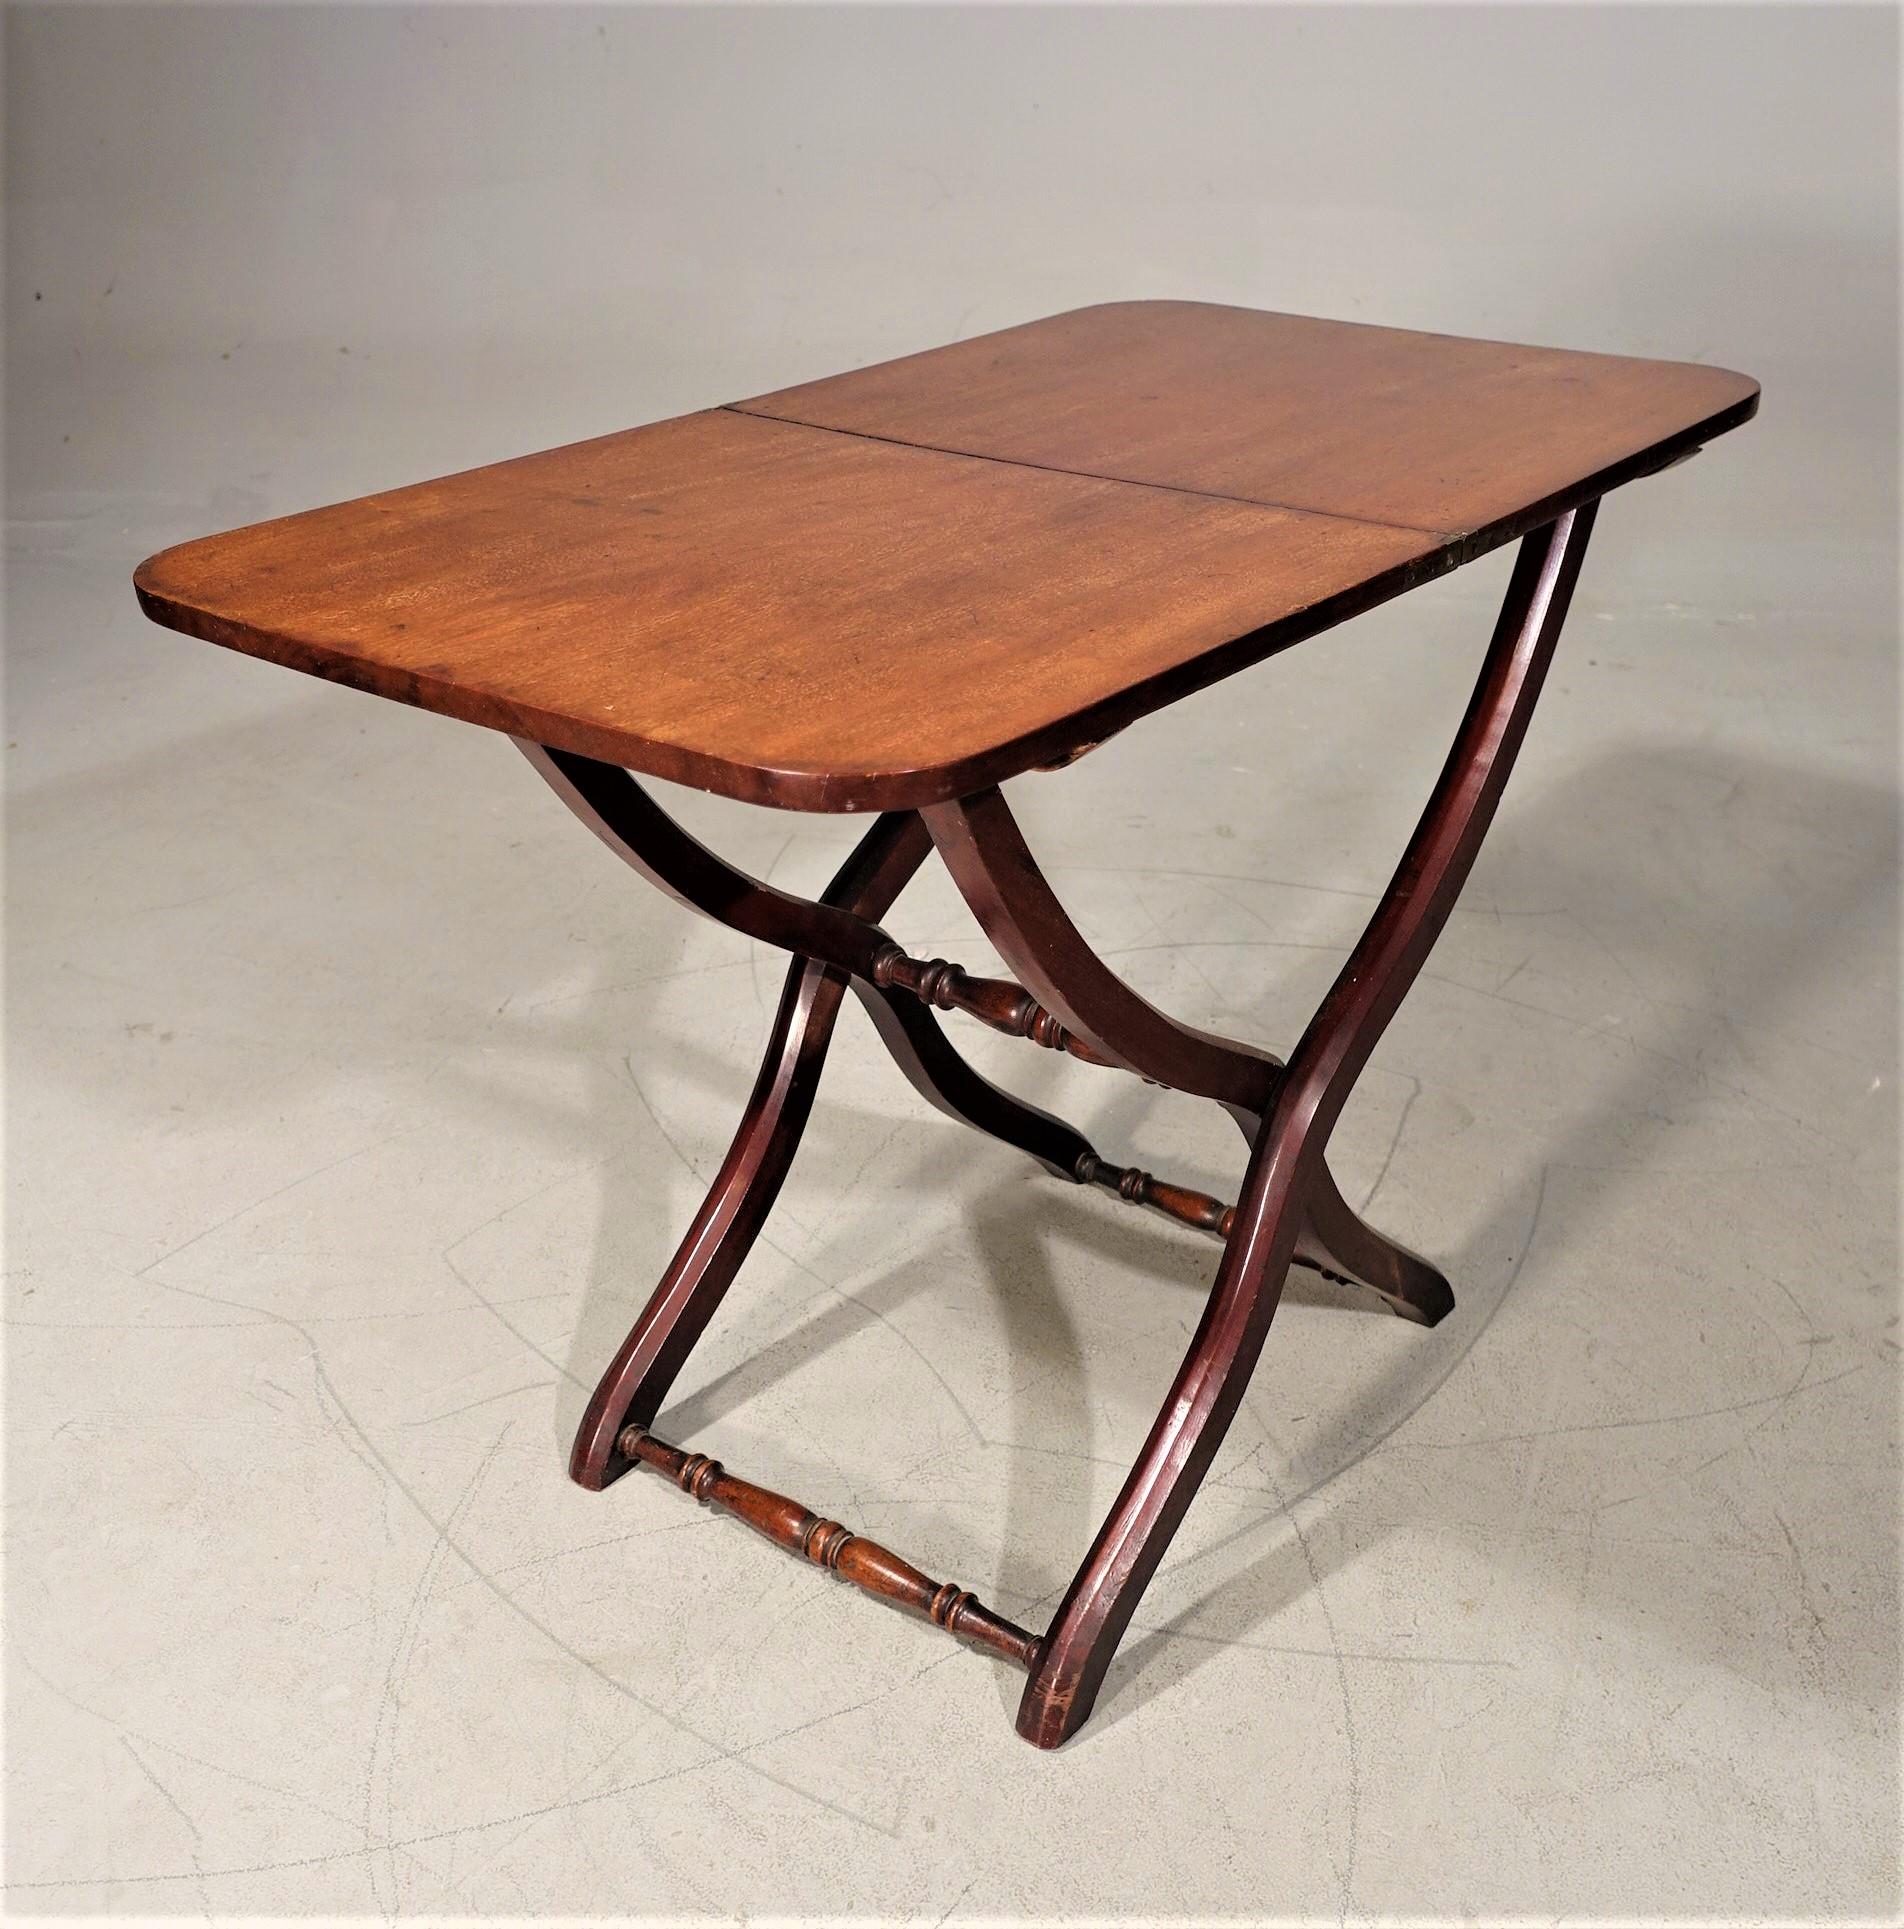 A George lll mahogany coaching table.

RR